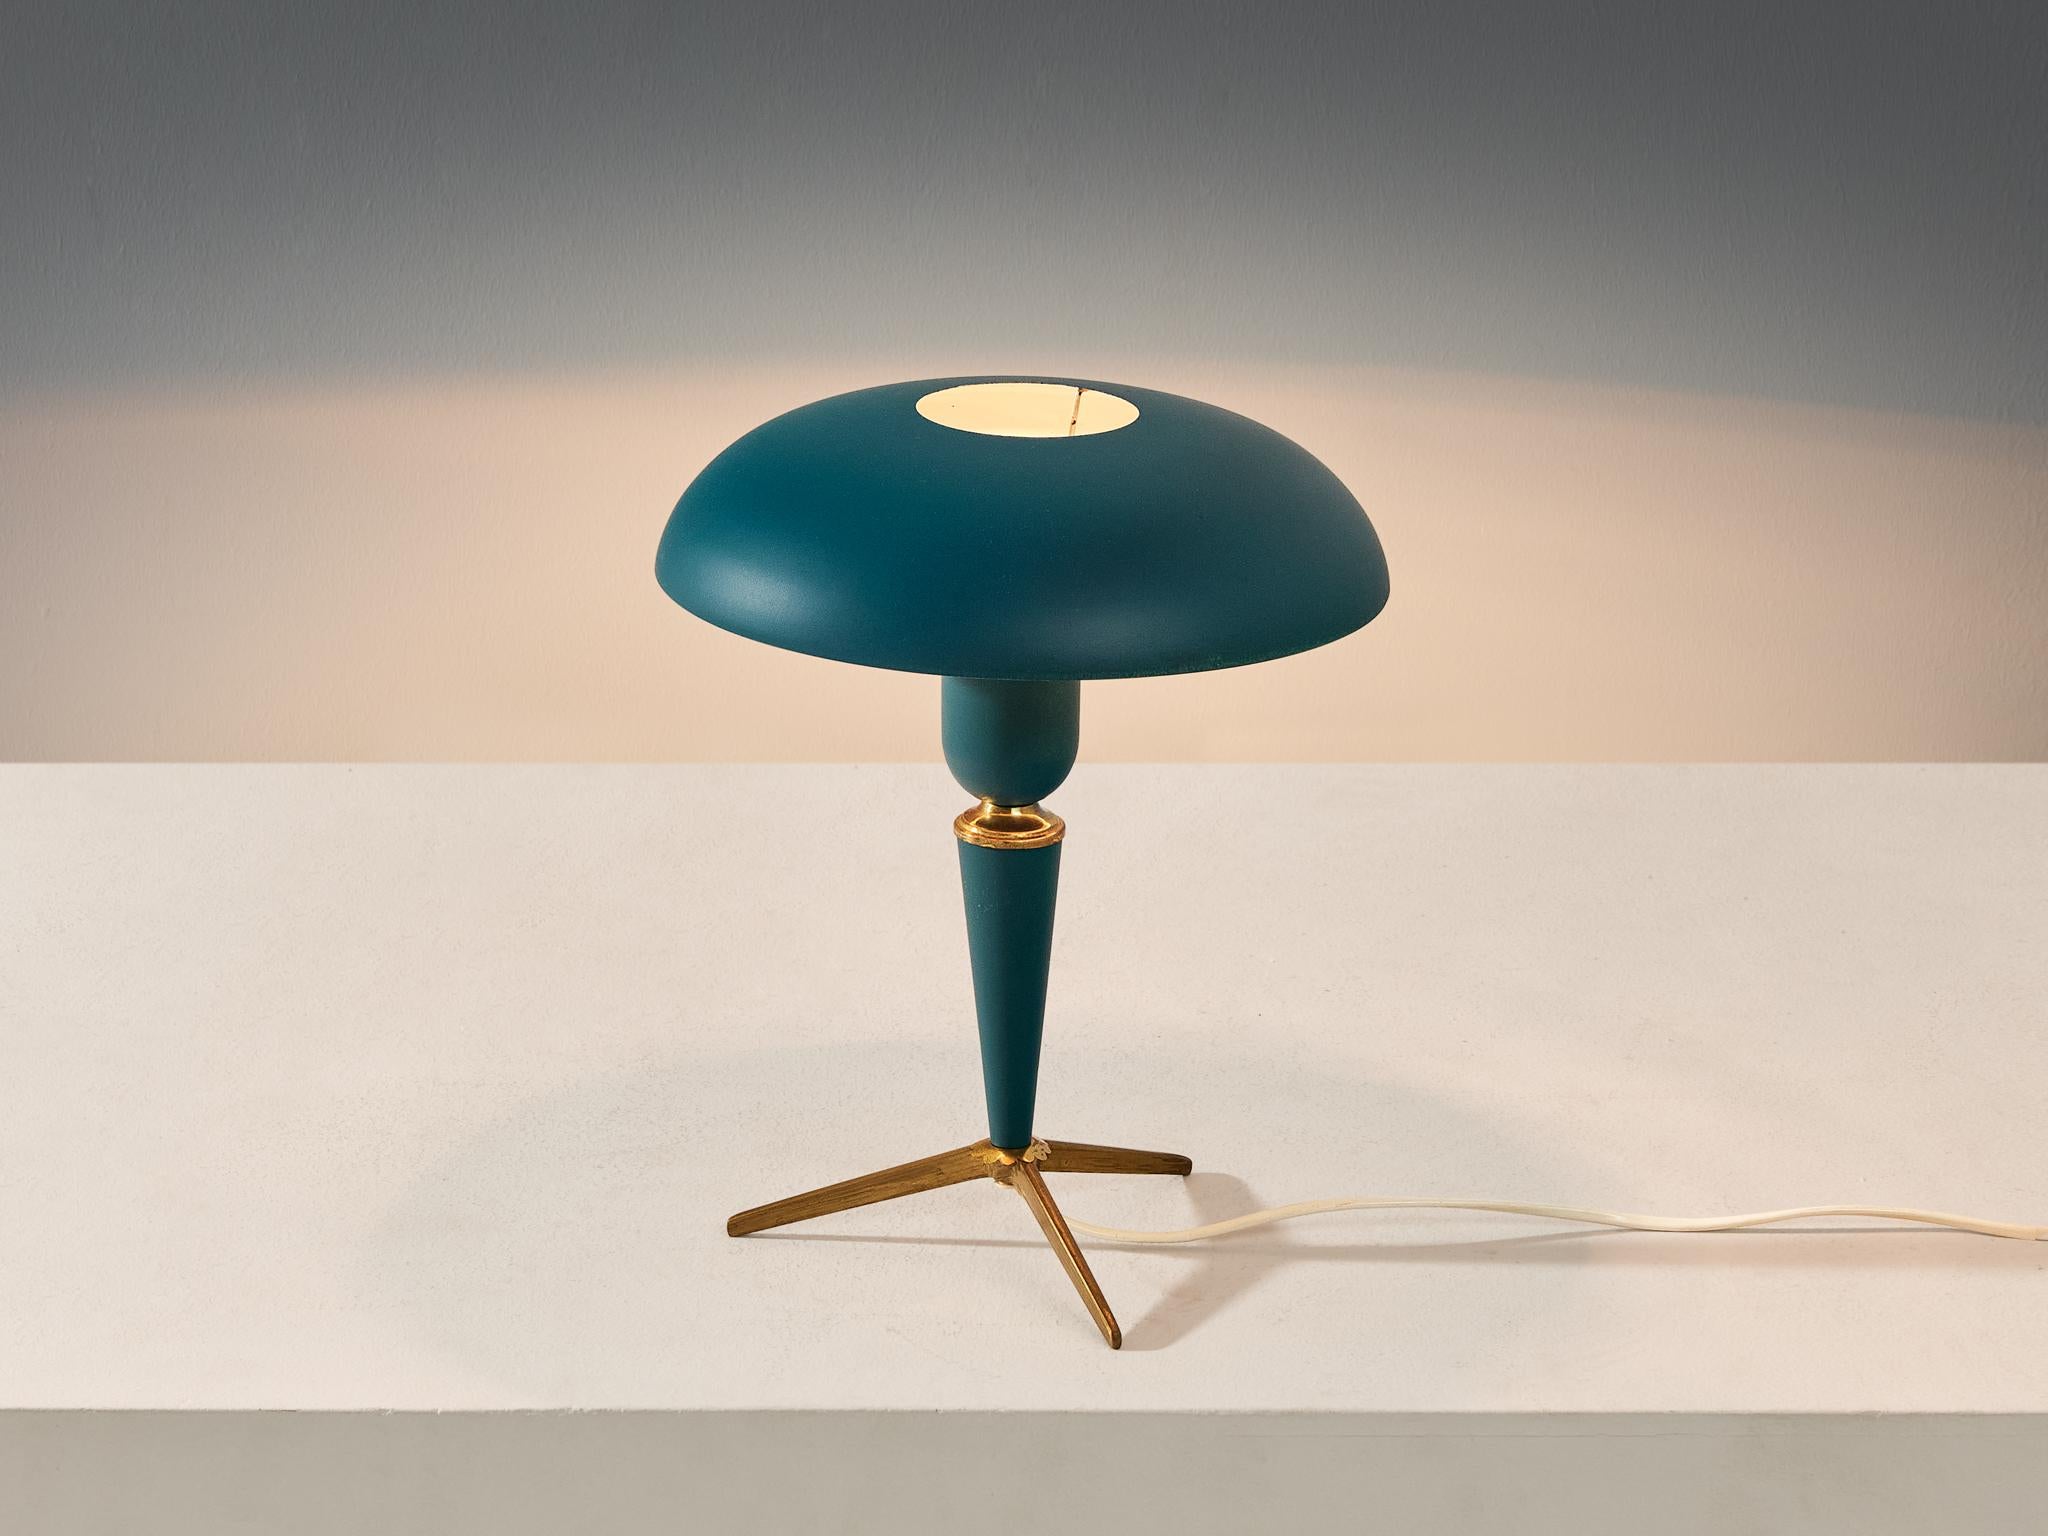 Louis Kalff for Philips, table lamp model ‘Bijou’, coated steel, coated aluminum, brass, Belgium, 1950s

Designed by the Dutch architect and designer, Louis Kalff, celebrated for his iconic lamp creations in collaboration with Philips, this